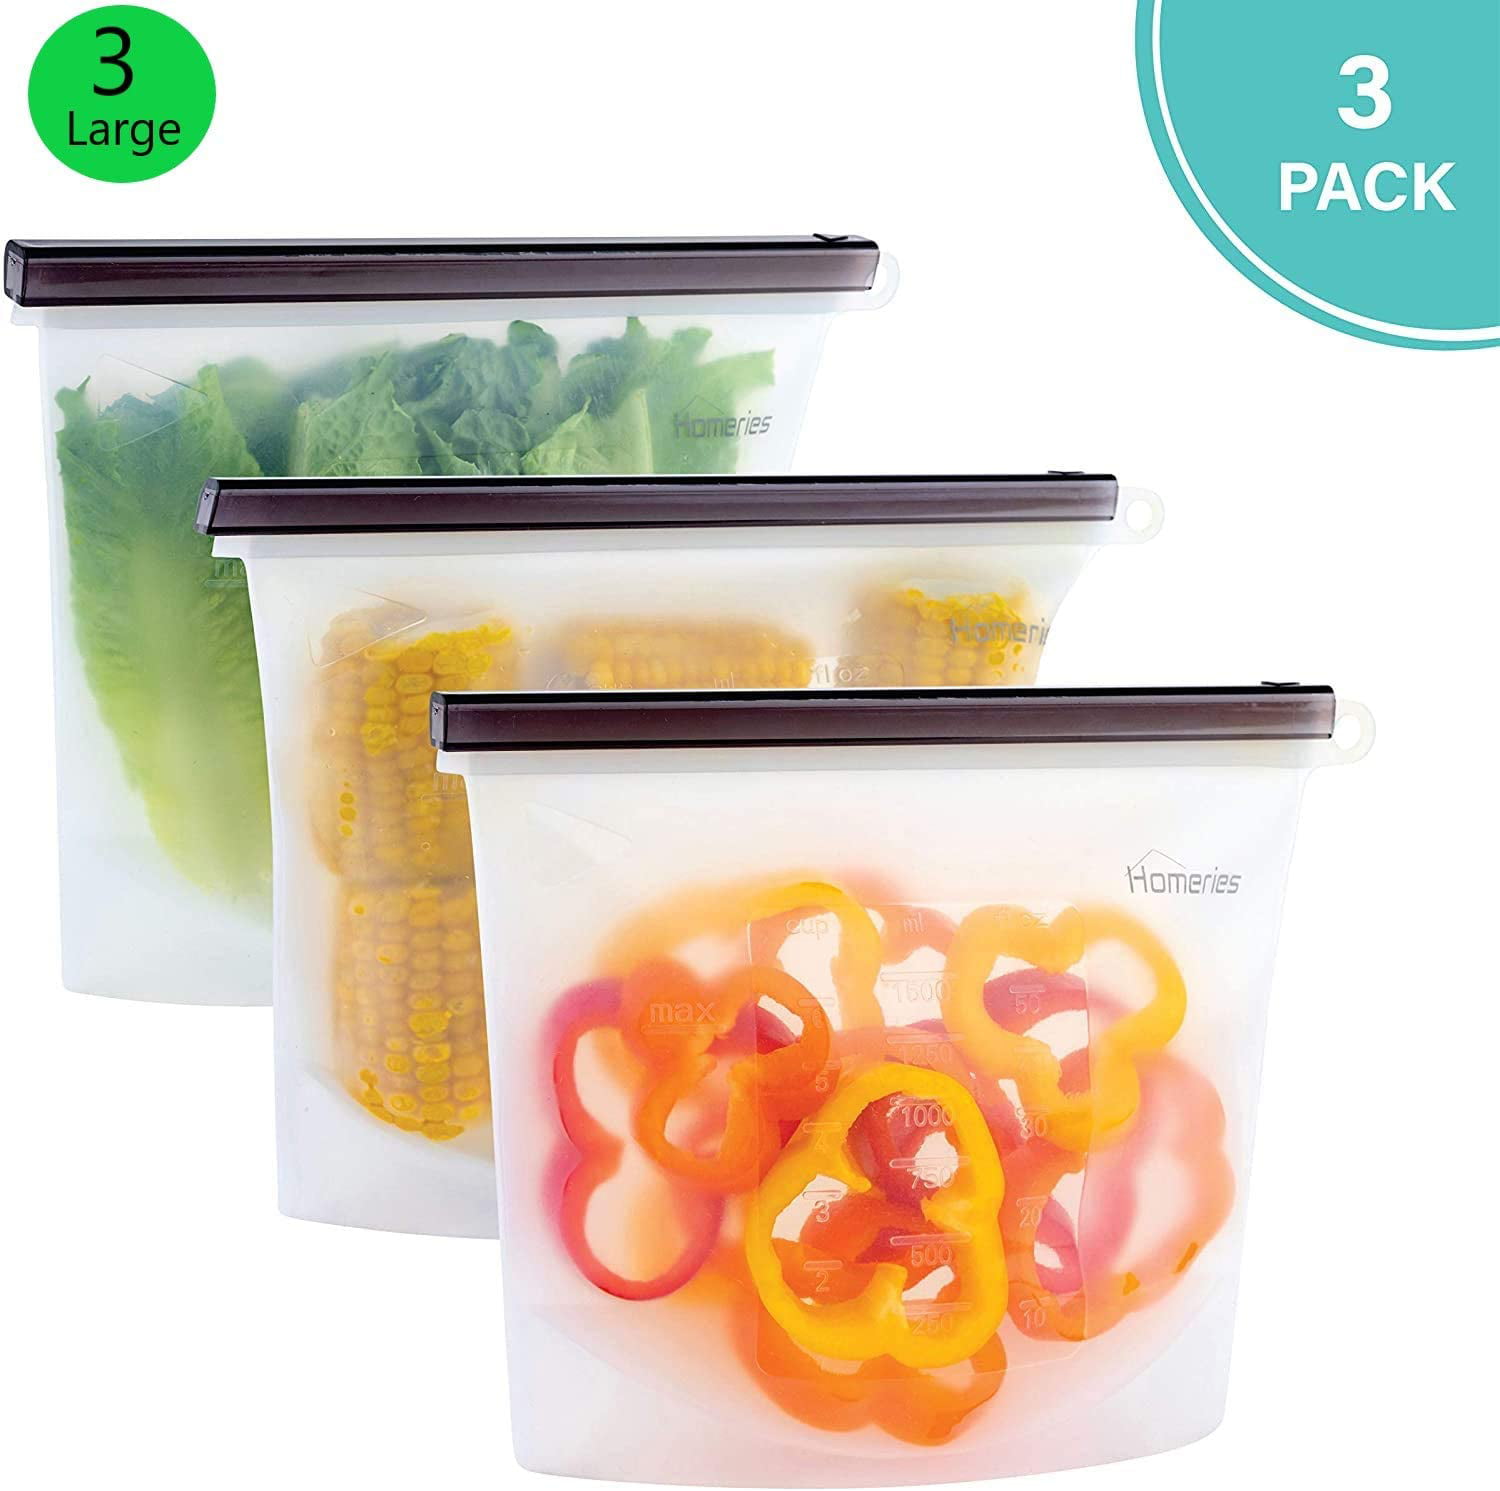 Yubatuo Safe Reusable Silicone Storage Ziplock Bags, Leakproof Reusable Gallon Freezer Bags, BPA Free Food Storage Bags for Marinate Food, Fruits